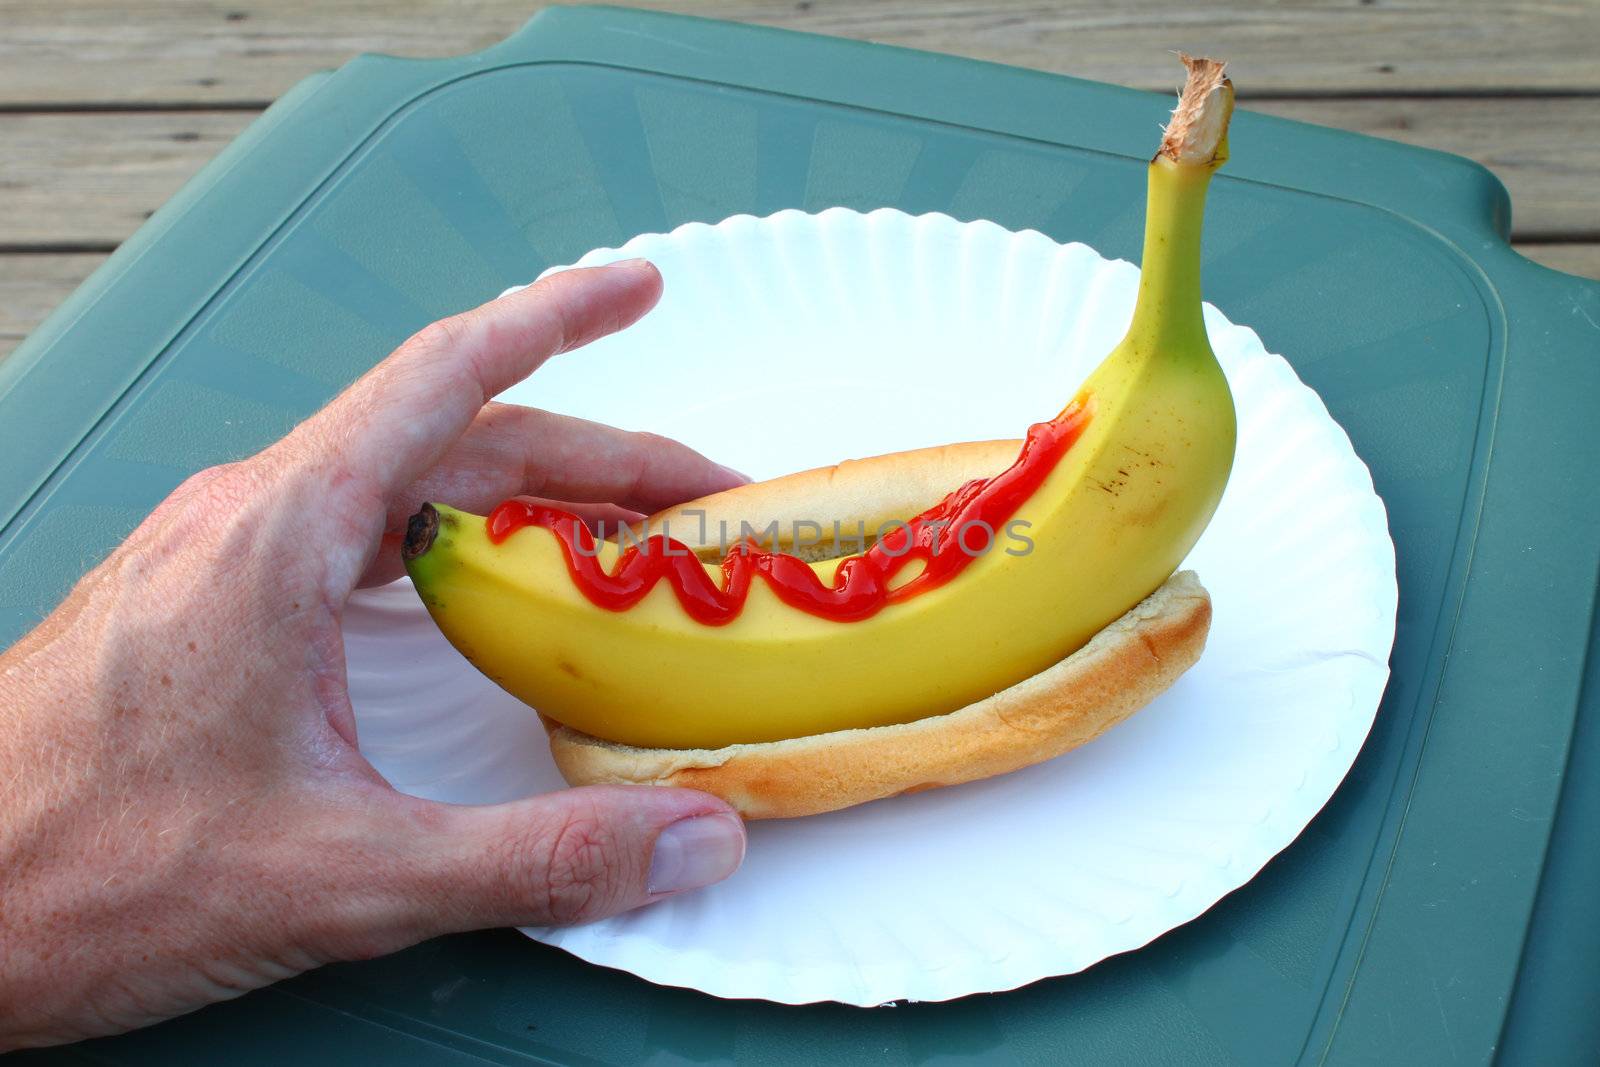 Banana dog with Ketchup by Wirepec